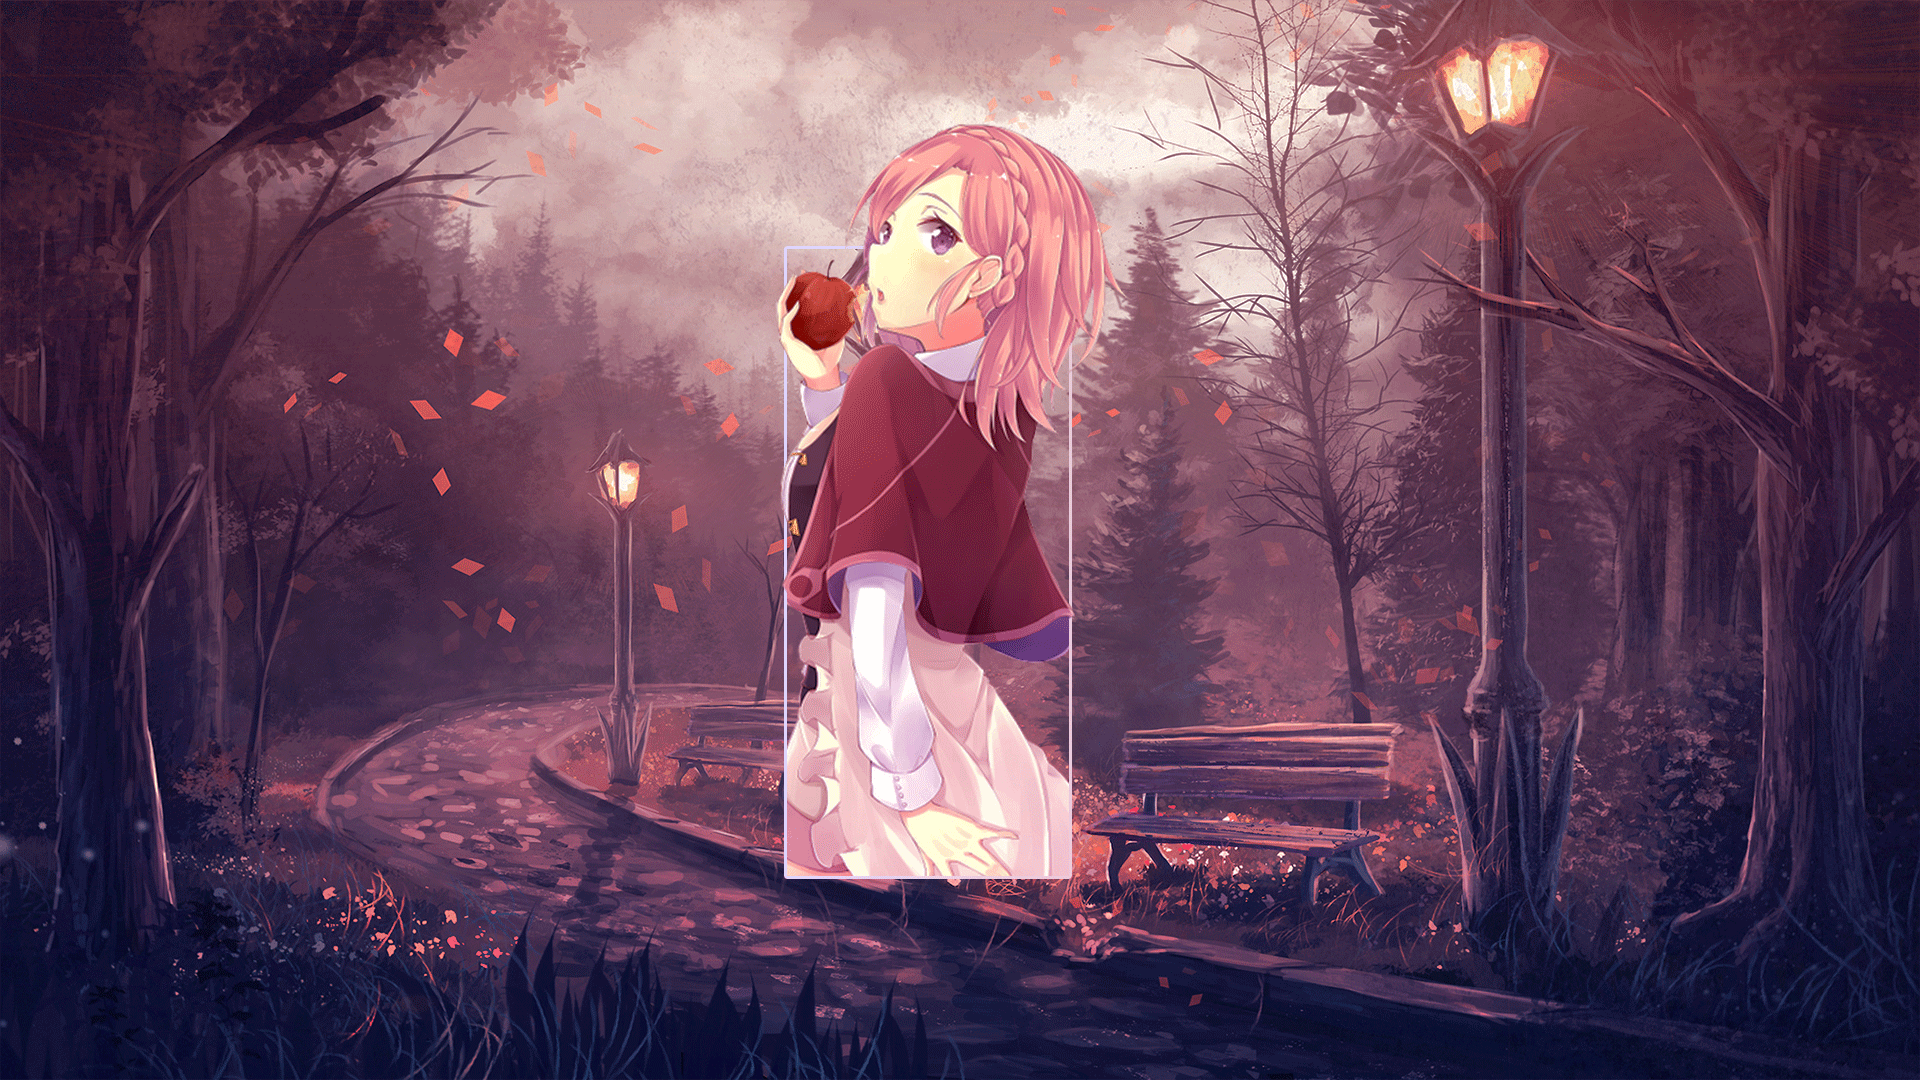 Anime 1920x1080 anime anime girls Apple a Caramel digital art picture-in-picture fall food fruit apples lantern trees bench redhead